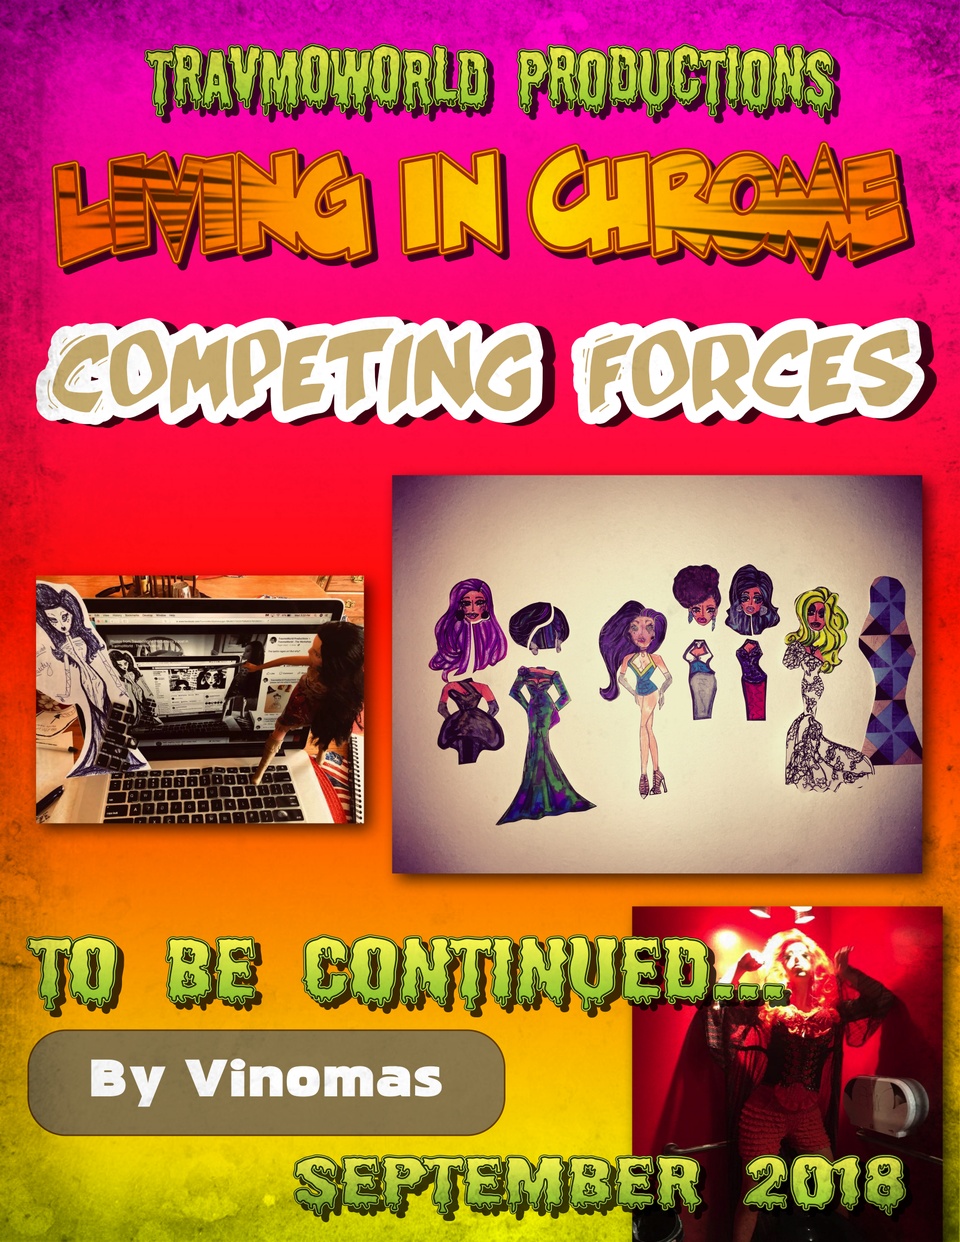 Living In Chrome : Episode 5 : Competing Forces Page 37 : To Be Continued...